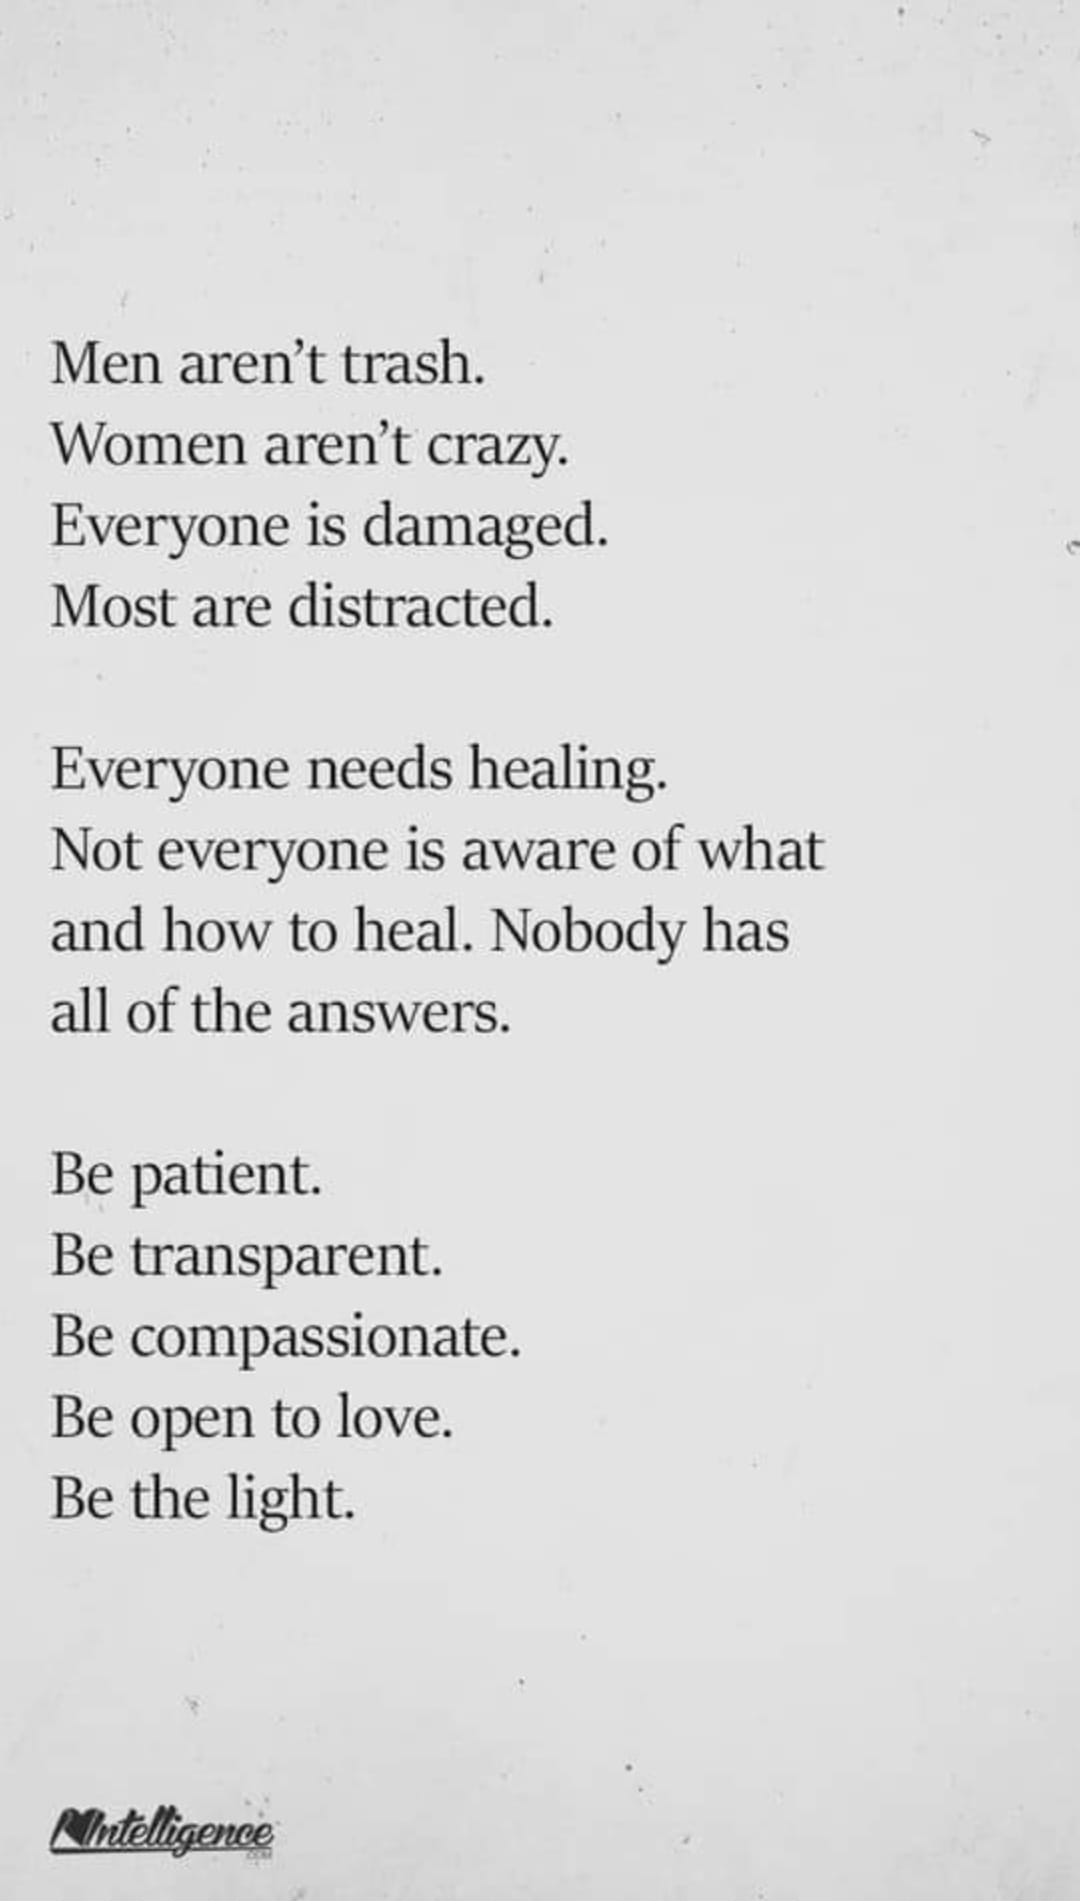 men aren't trash, women aren't crazy, everyone is damaged, most are distracted, everyone needs healing, not everyone is aware of what and how to heal, nobody has all of the answers, be patient, be transparent, be compassionate